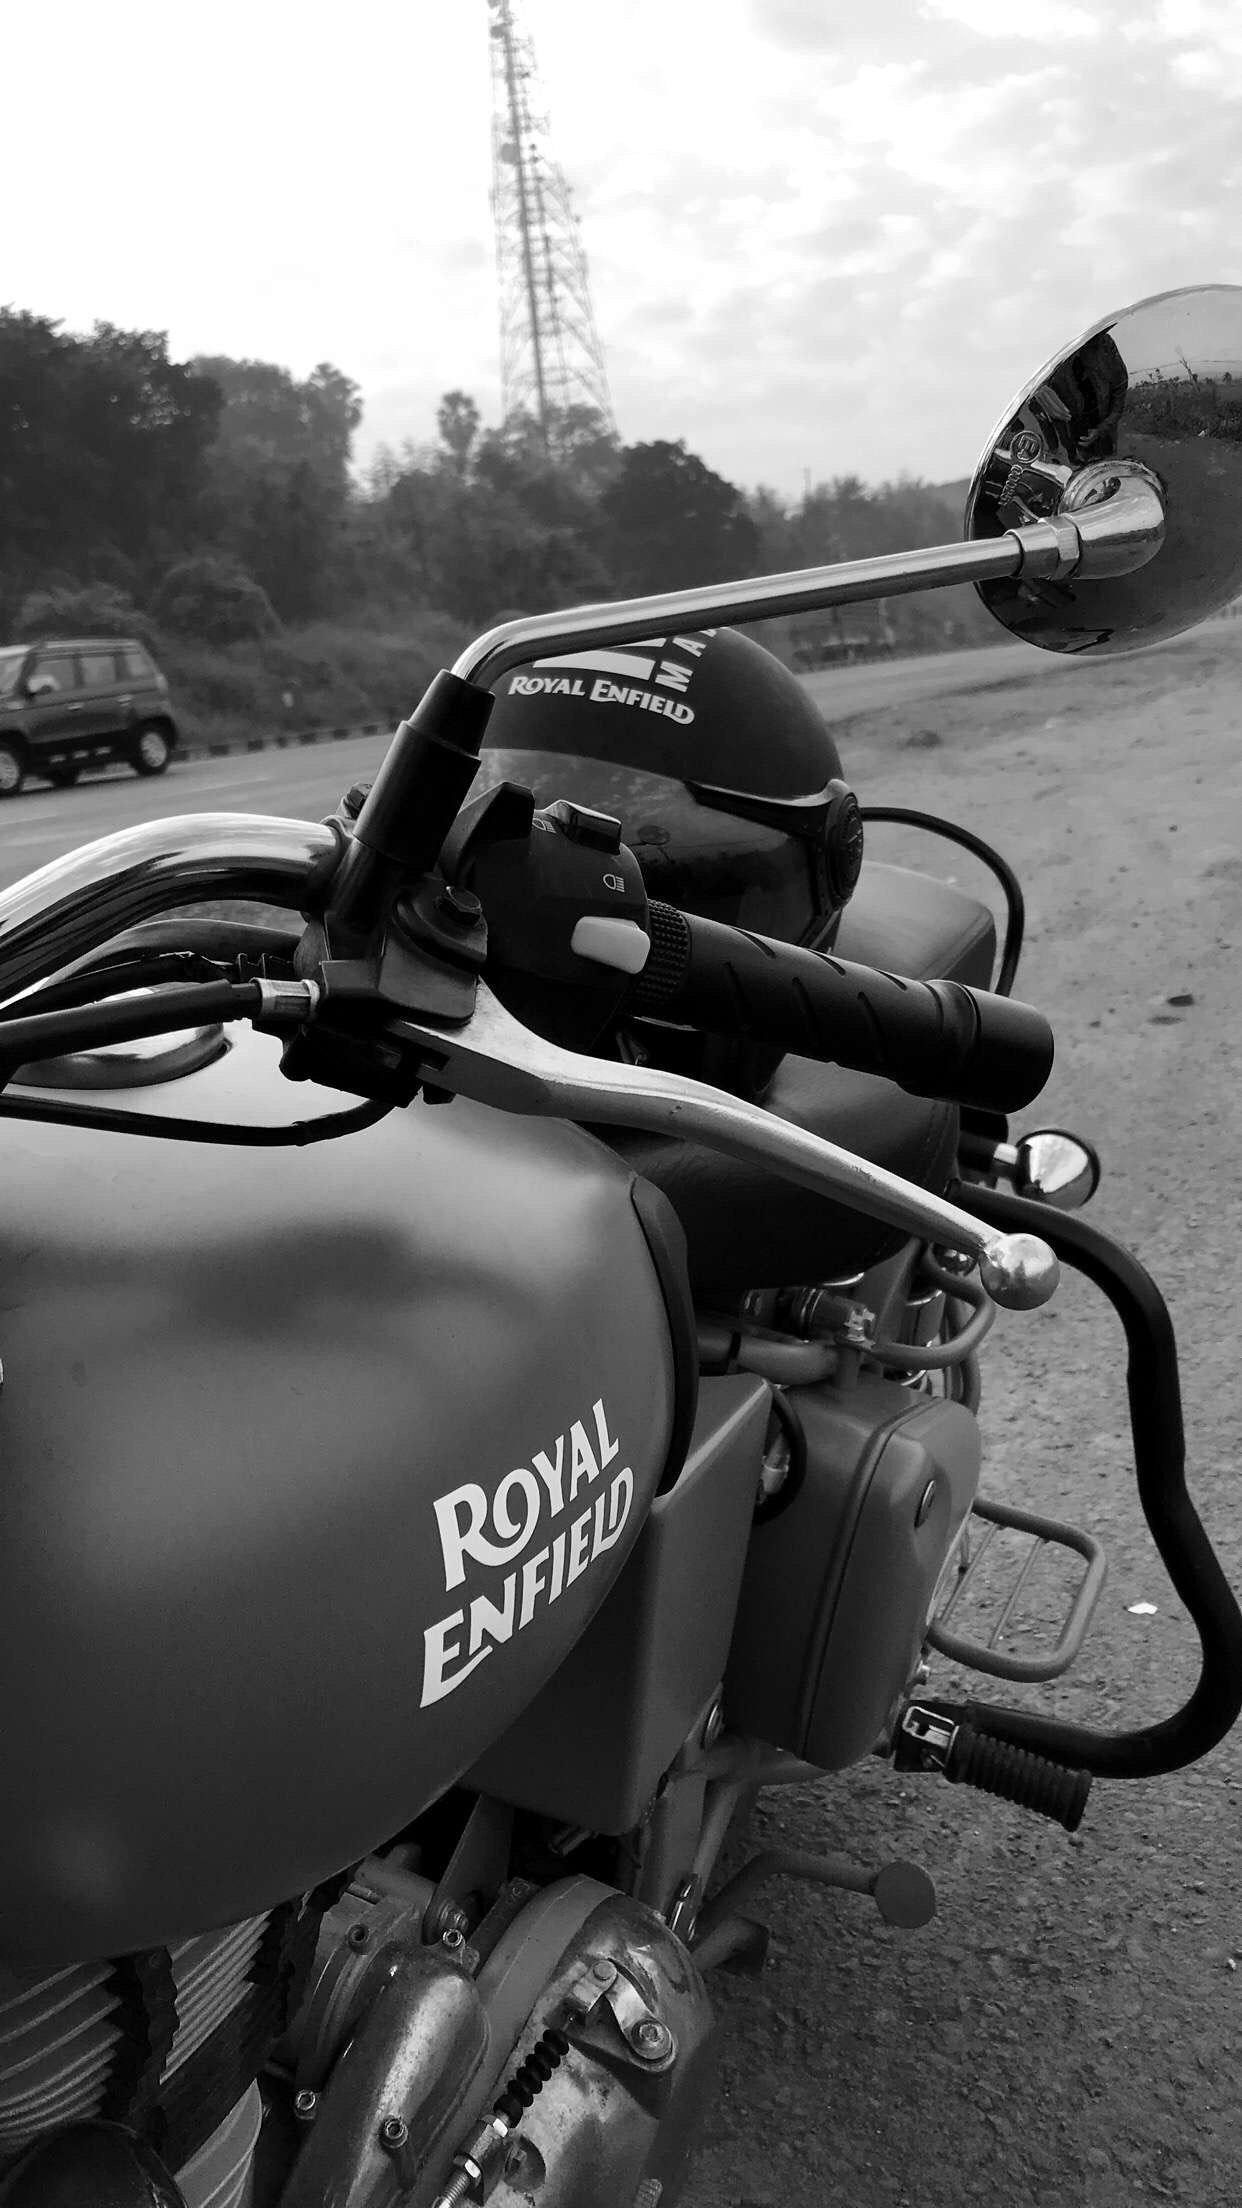 Royal Enfield Indian Motorcycle Grayscale Photo · Free